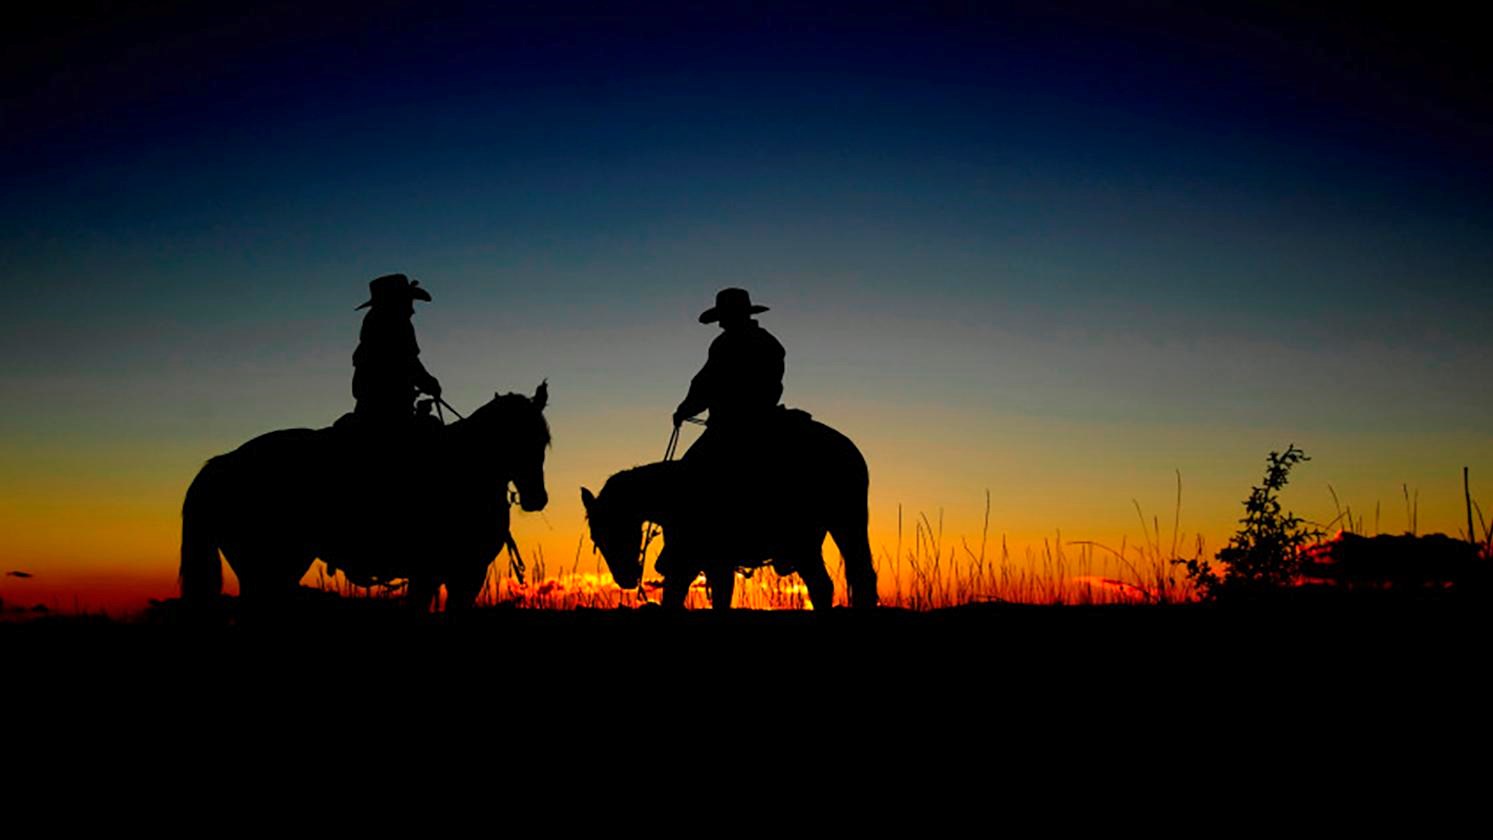 Two cowboys on horseback silhouetted against sunset.